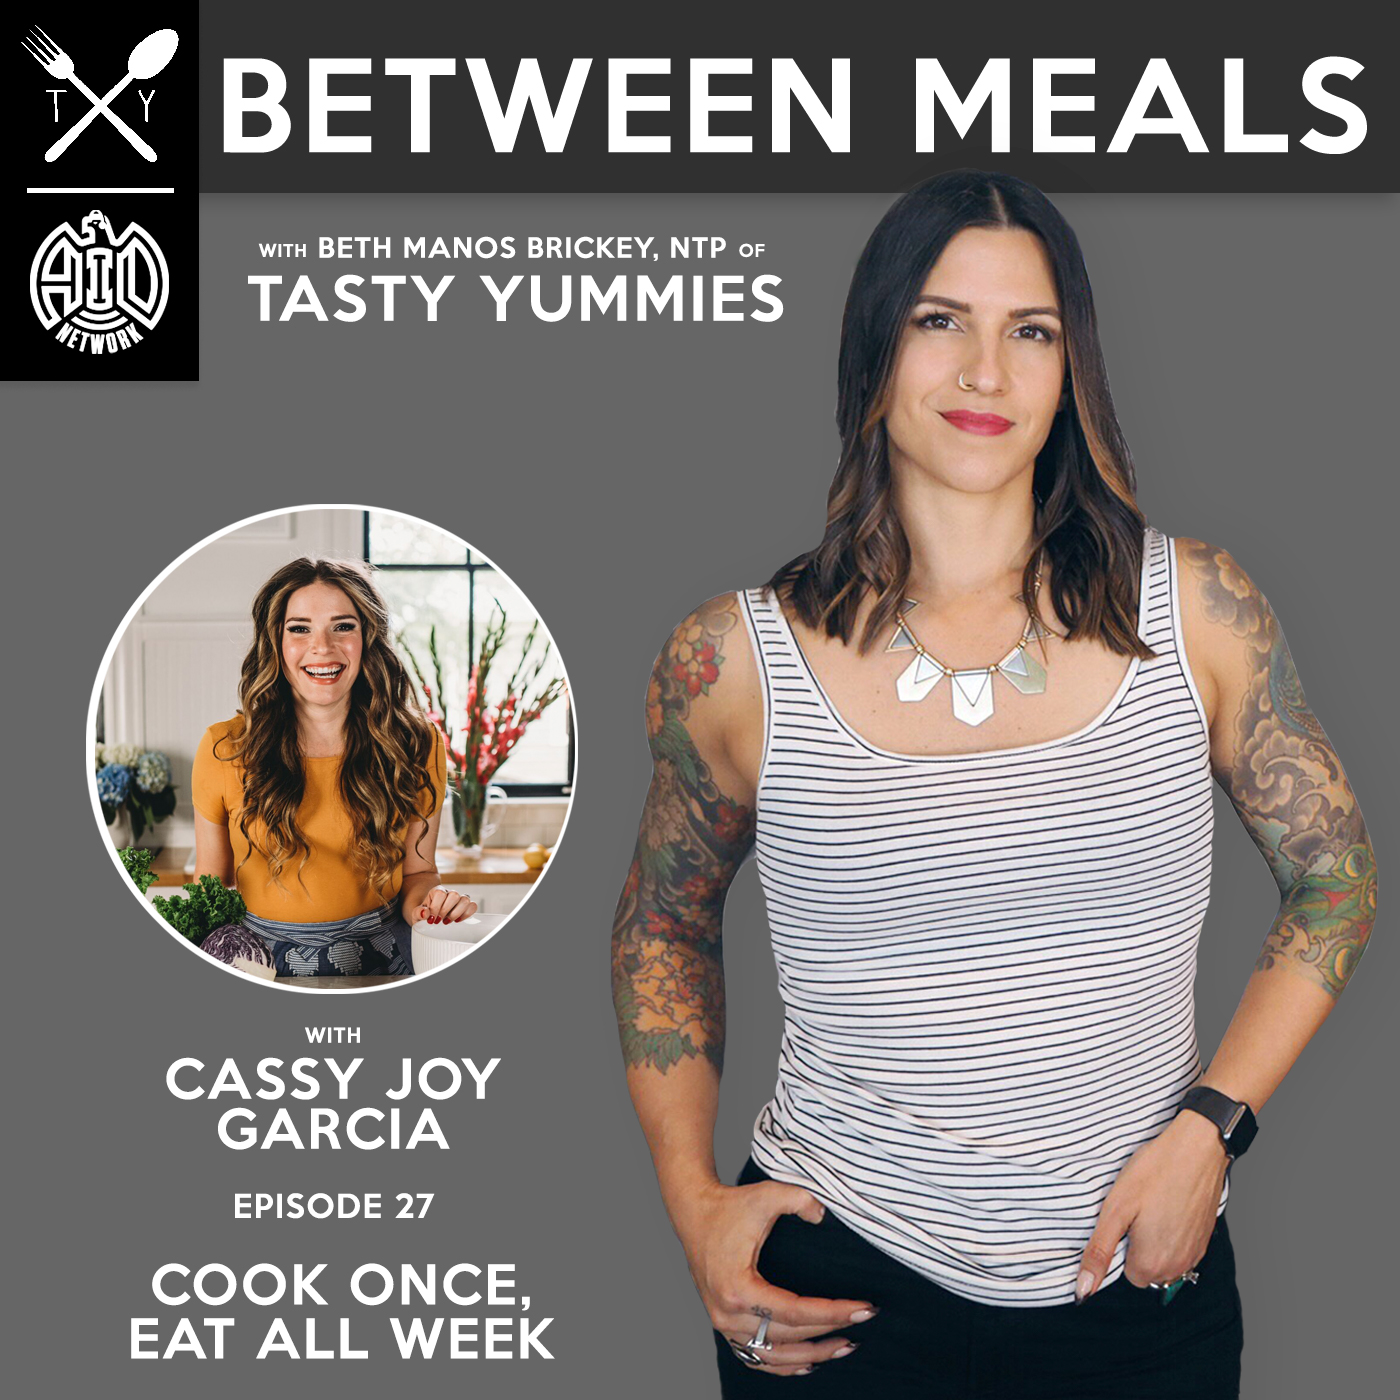 Between Meals Podcast. Episode 27: Cook Once, Eat All Week. Master Your Meal Prep with Cassy Joy Garcia